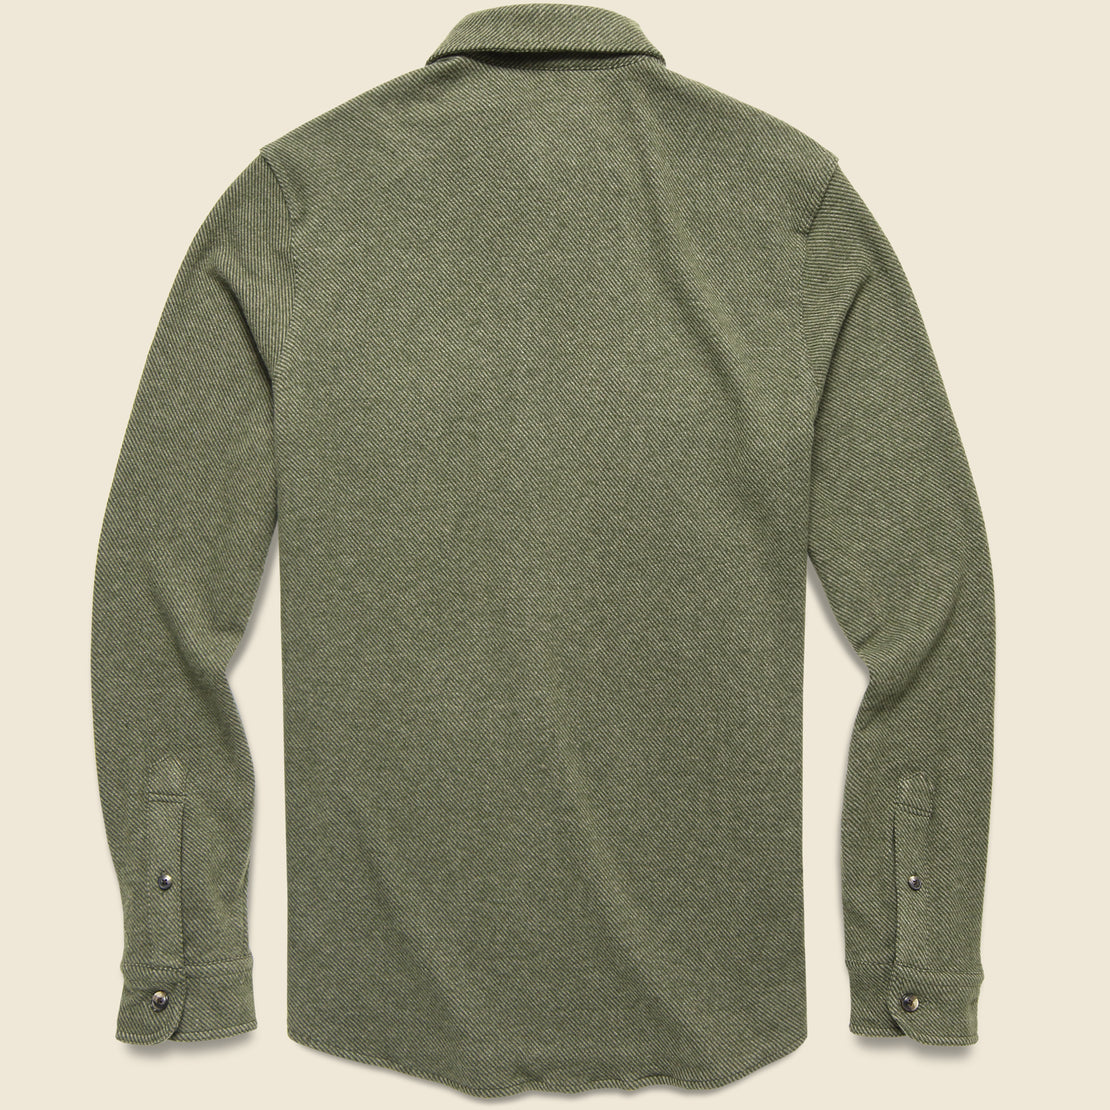 Legend Sweater Shirt - Olive Melange Twill - Faherty - STAG Provisions - Tops - L/S Woven - Solid